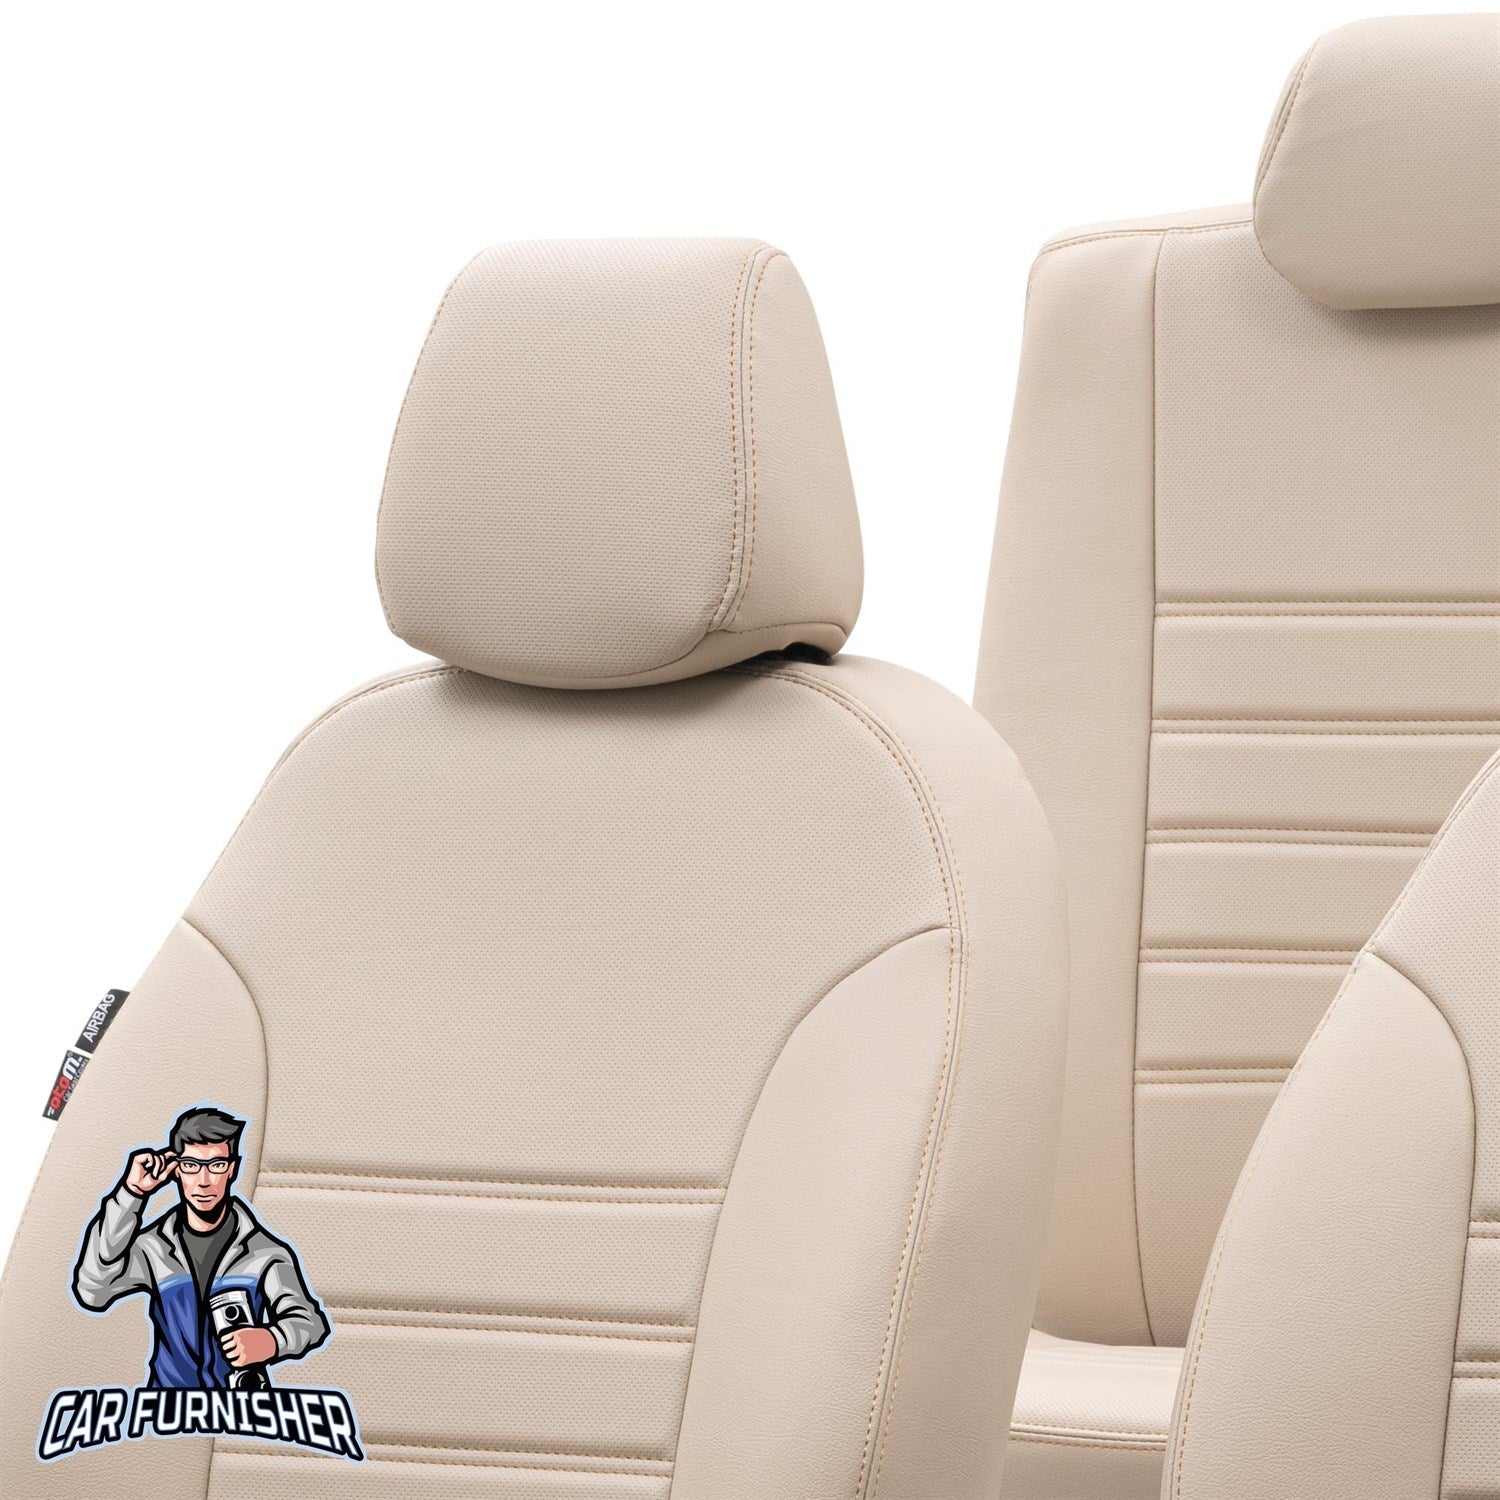 Peugeot 508 Seat Covers Istanbul Leather Design Beige Leather